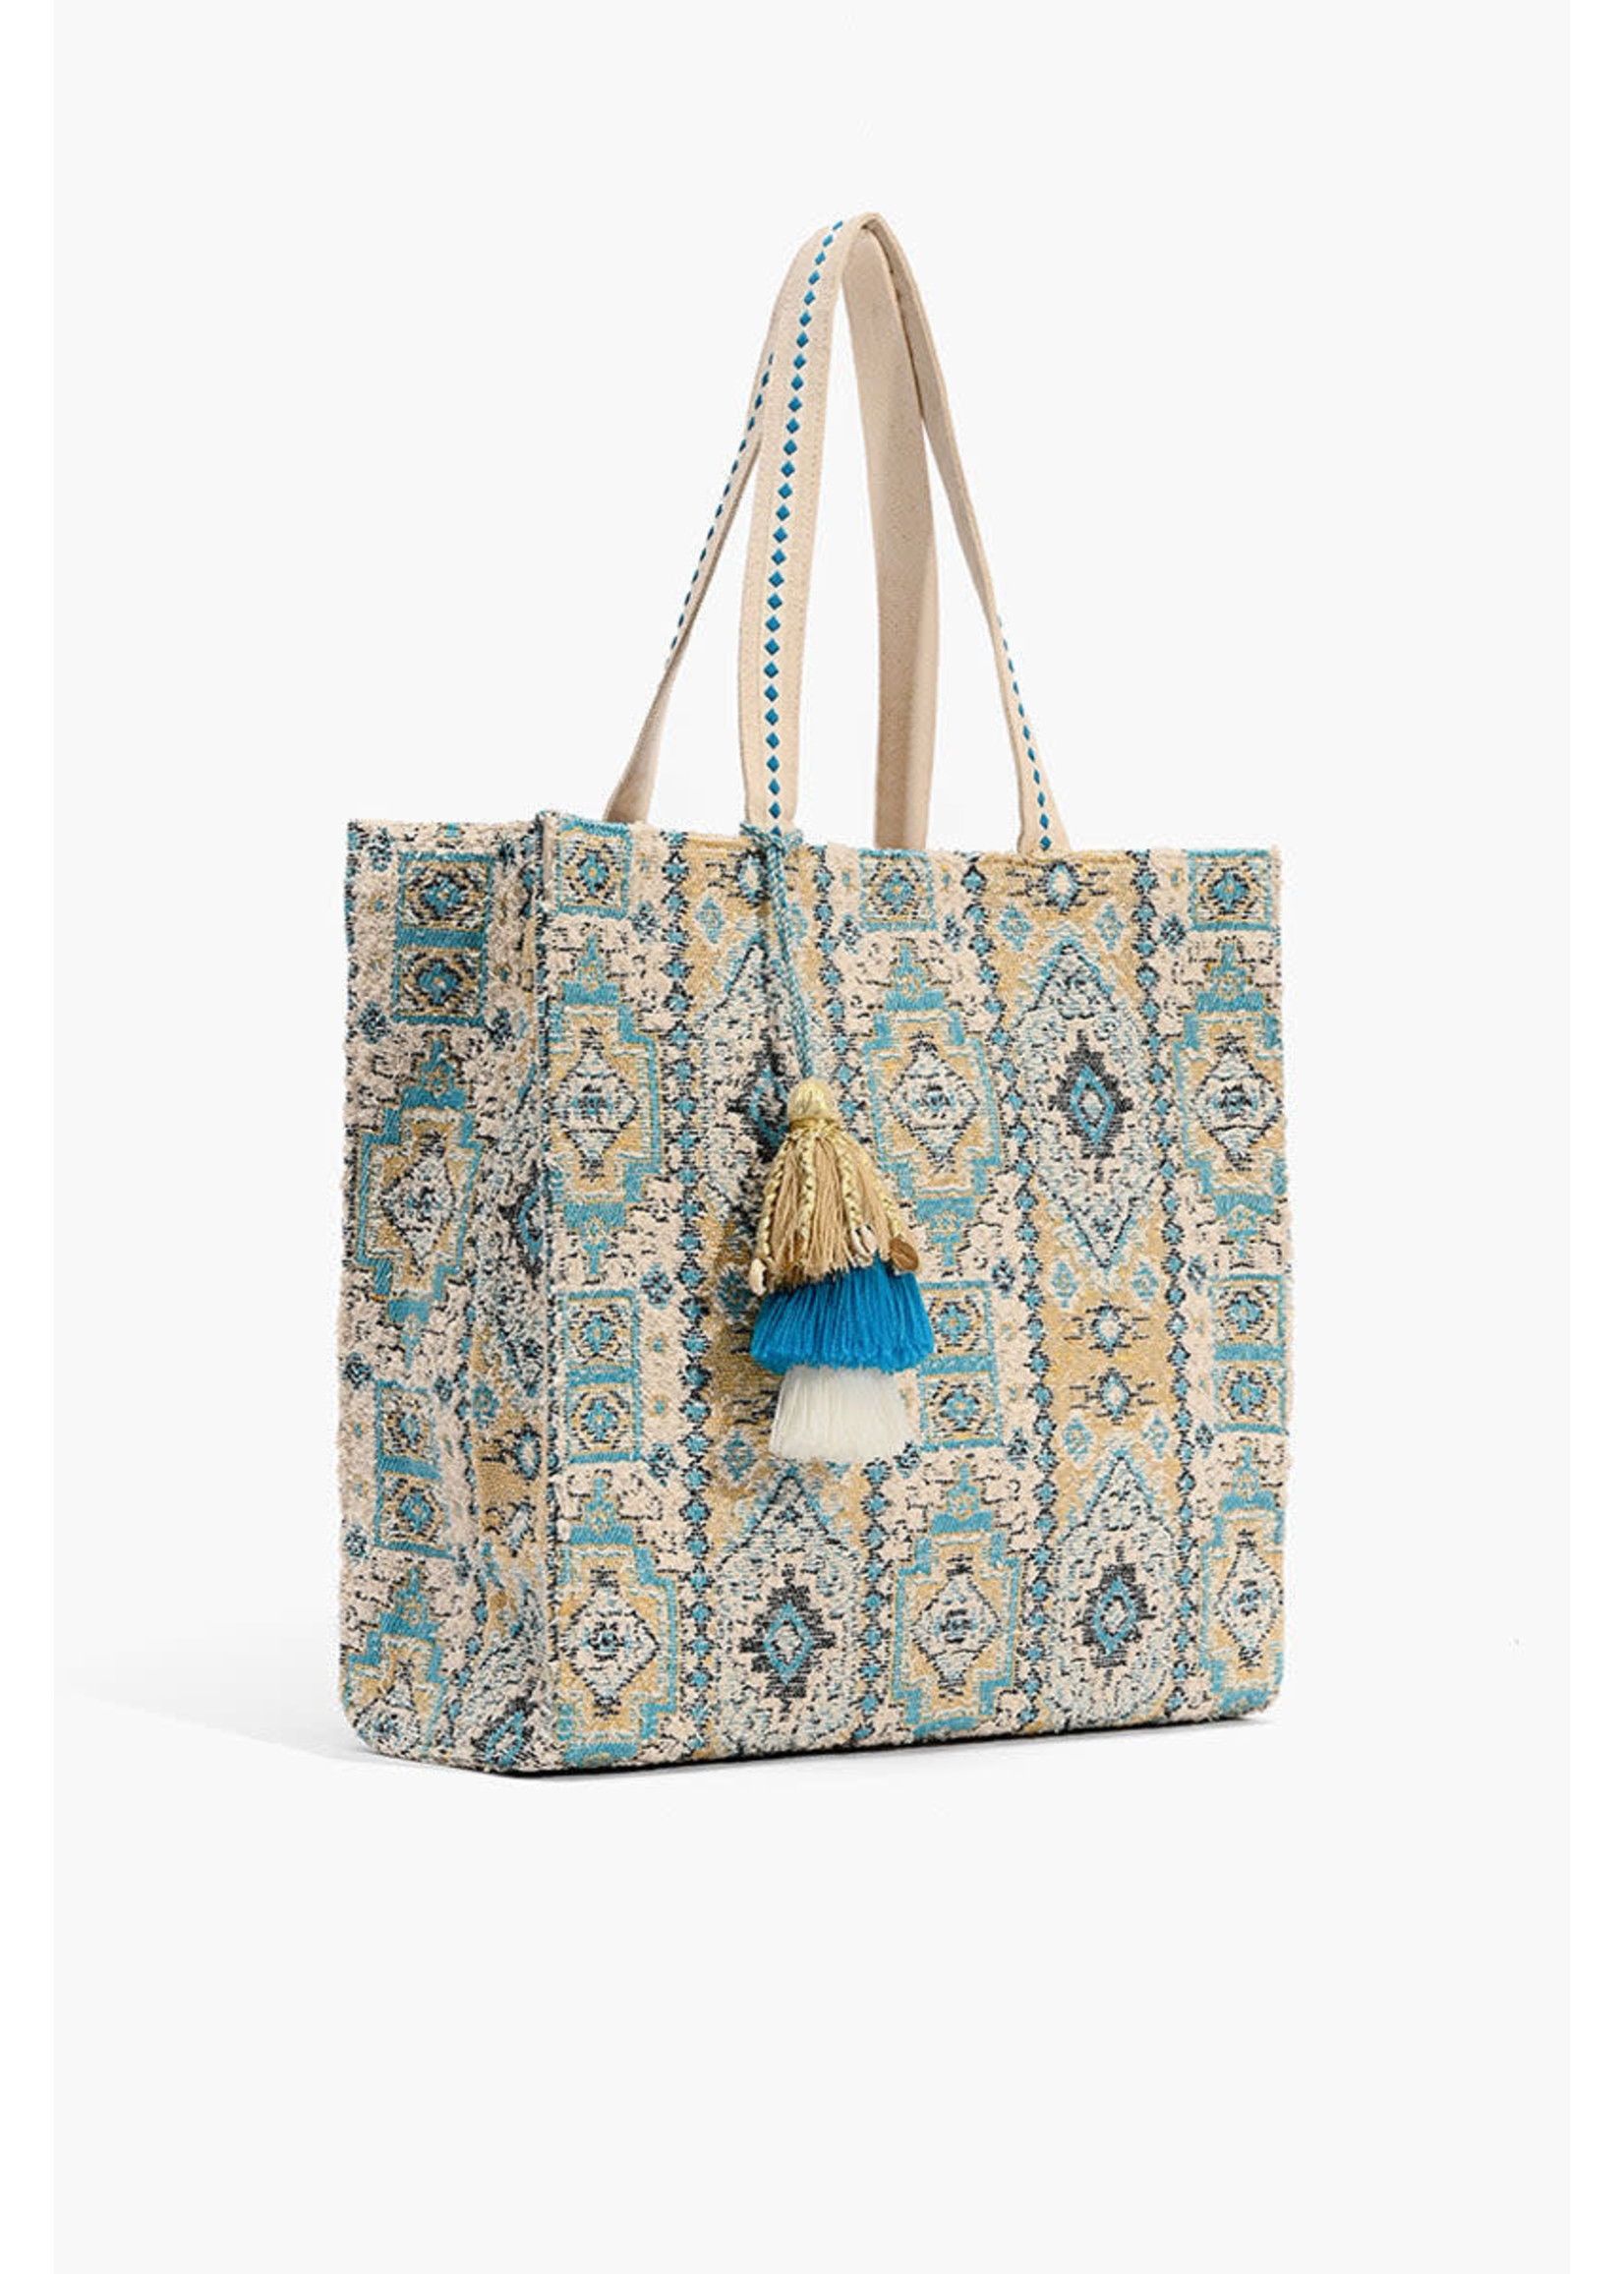 America & Beyond Indian Ancient Rug Inspired Tote